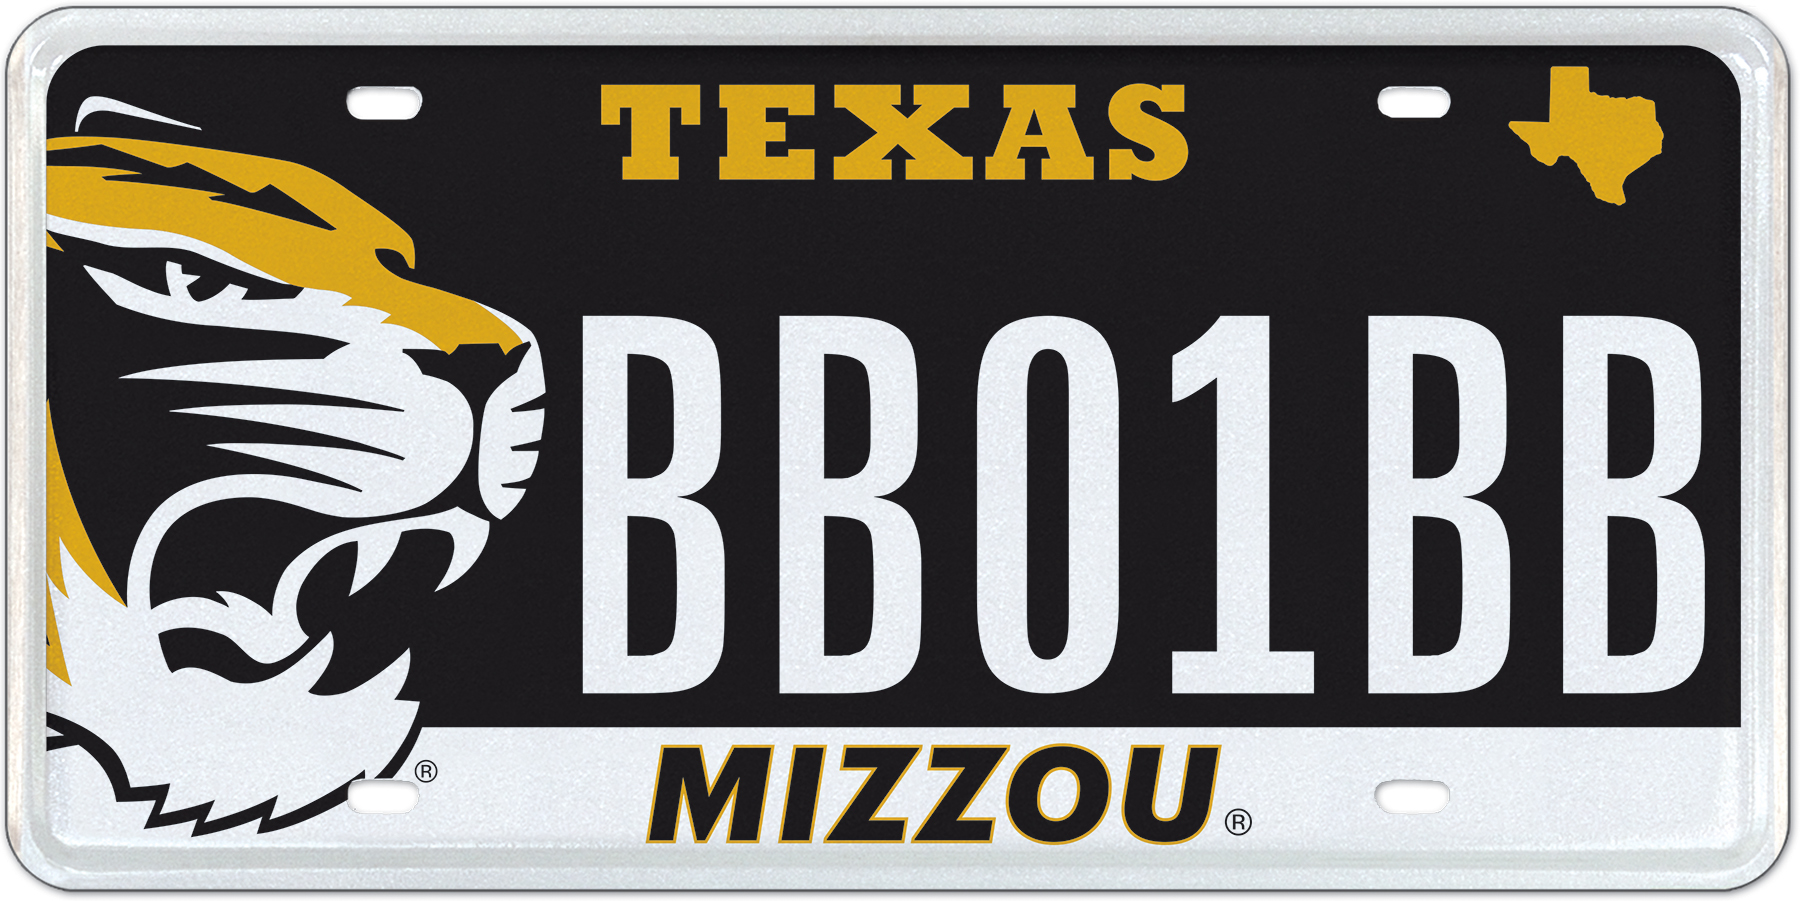 Register Your Interest - University of Missouri - Specialty plate in Texas